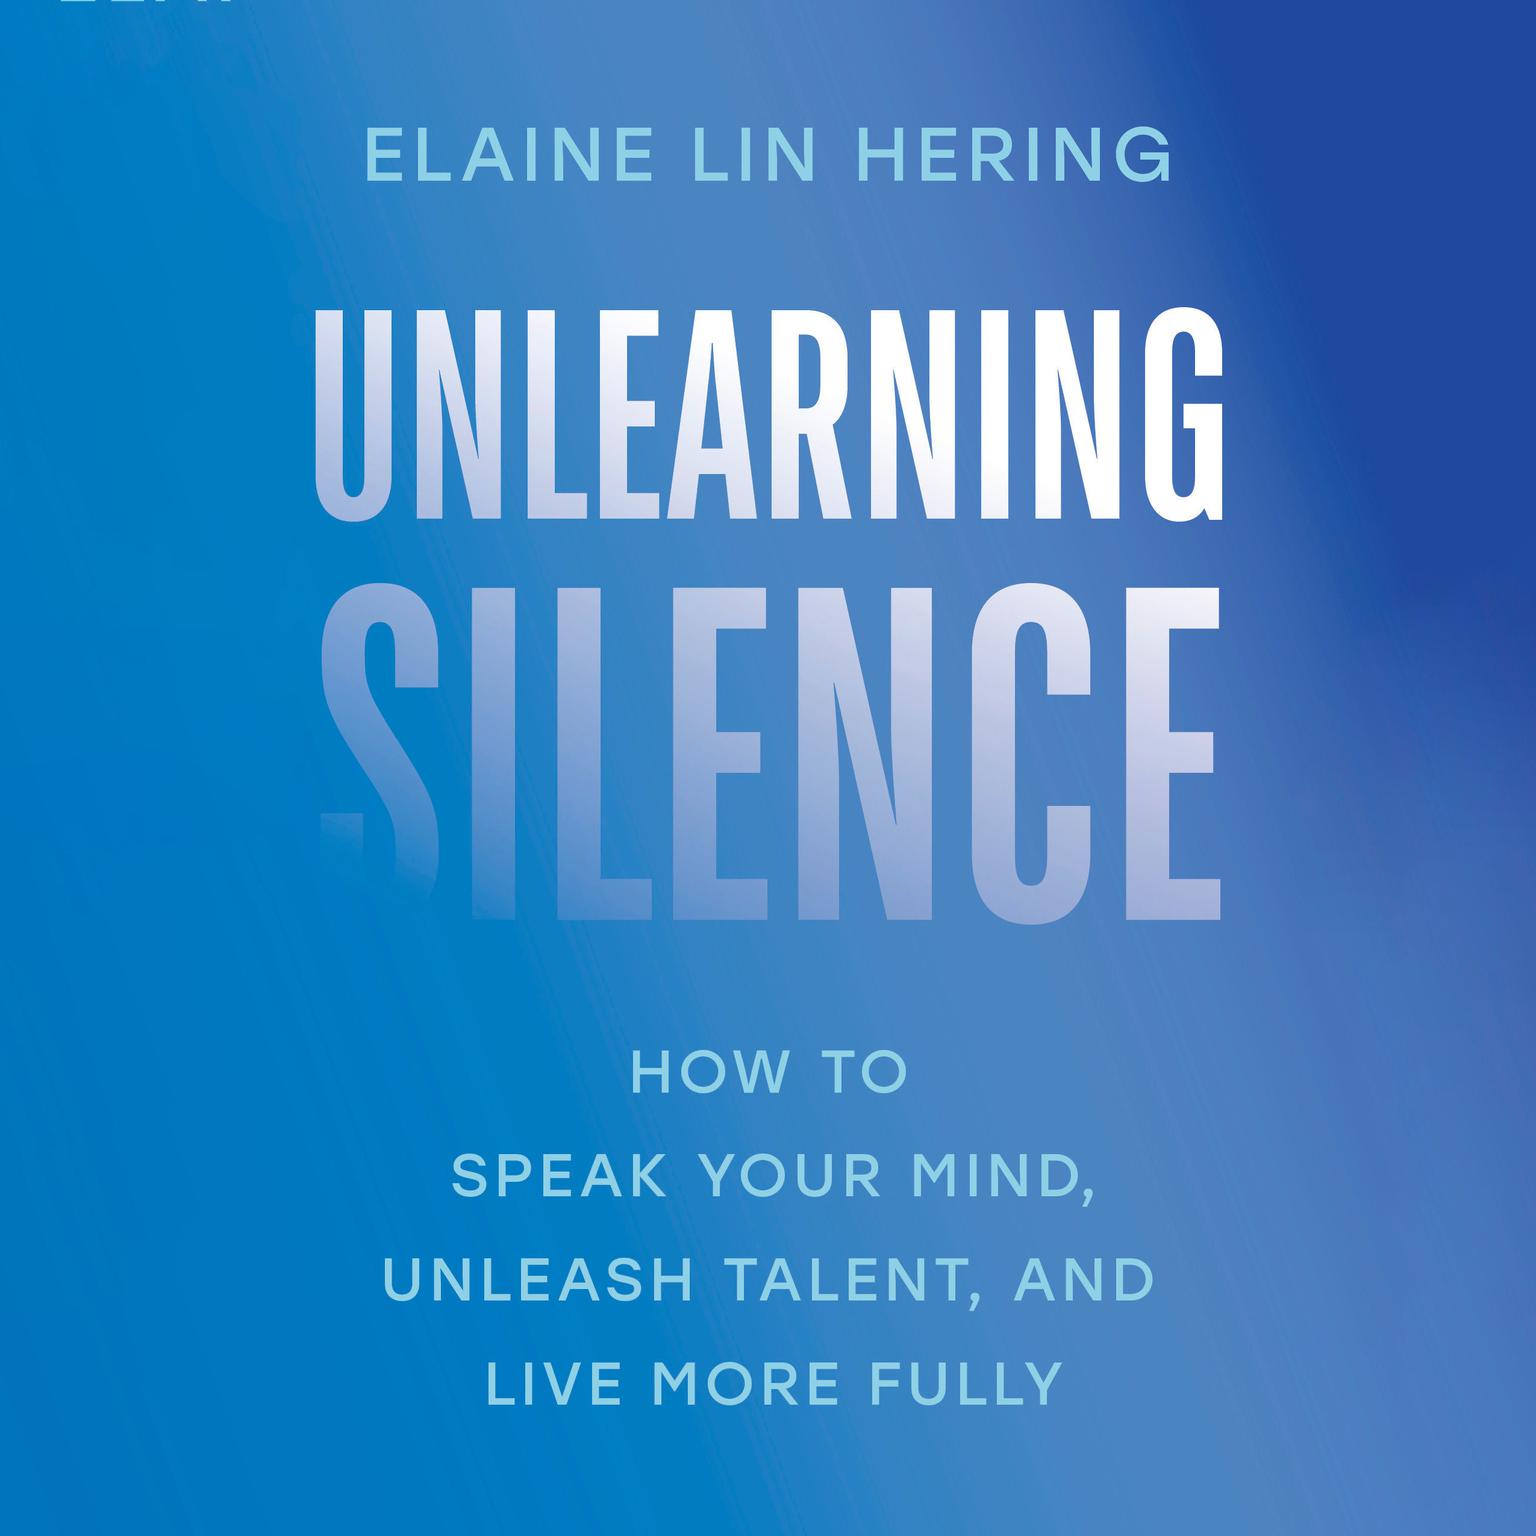 Unlearning Silence: How to Speak Your Mind, Unleash Talent, and Live More Fully Audiobook, by Elaine Lin Hering